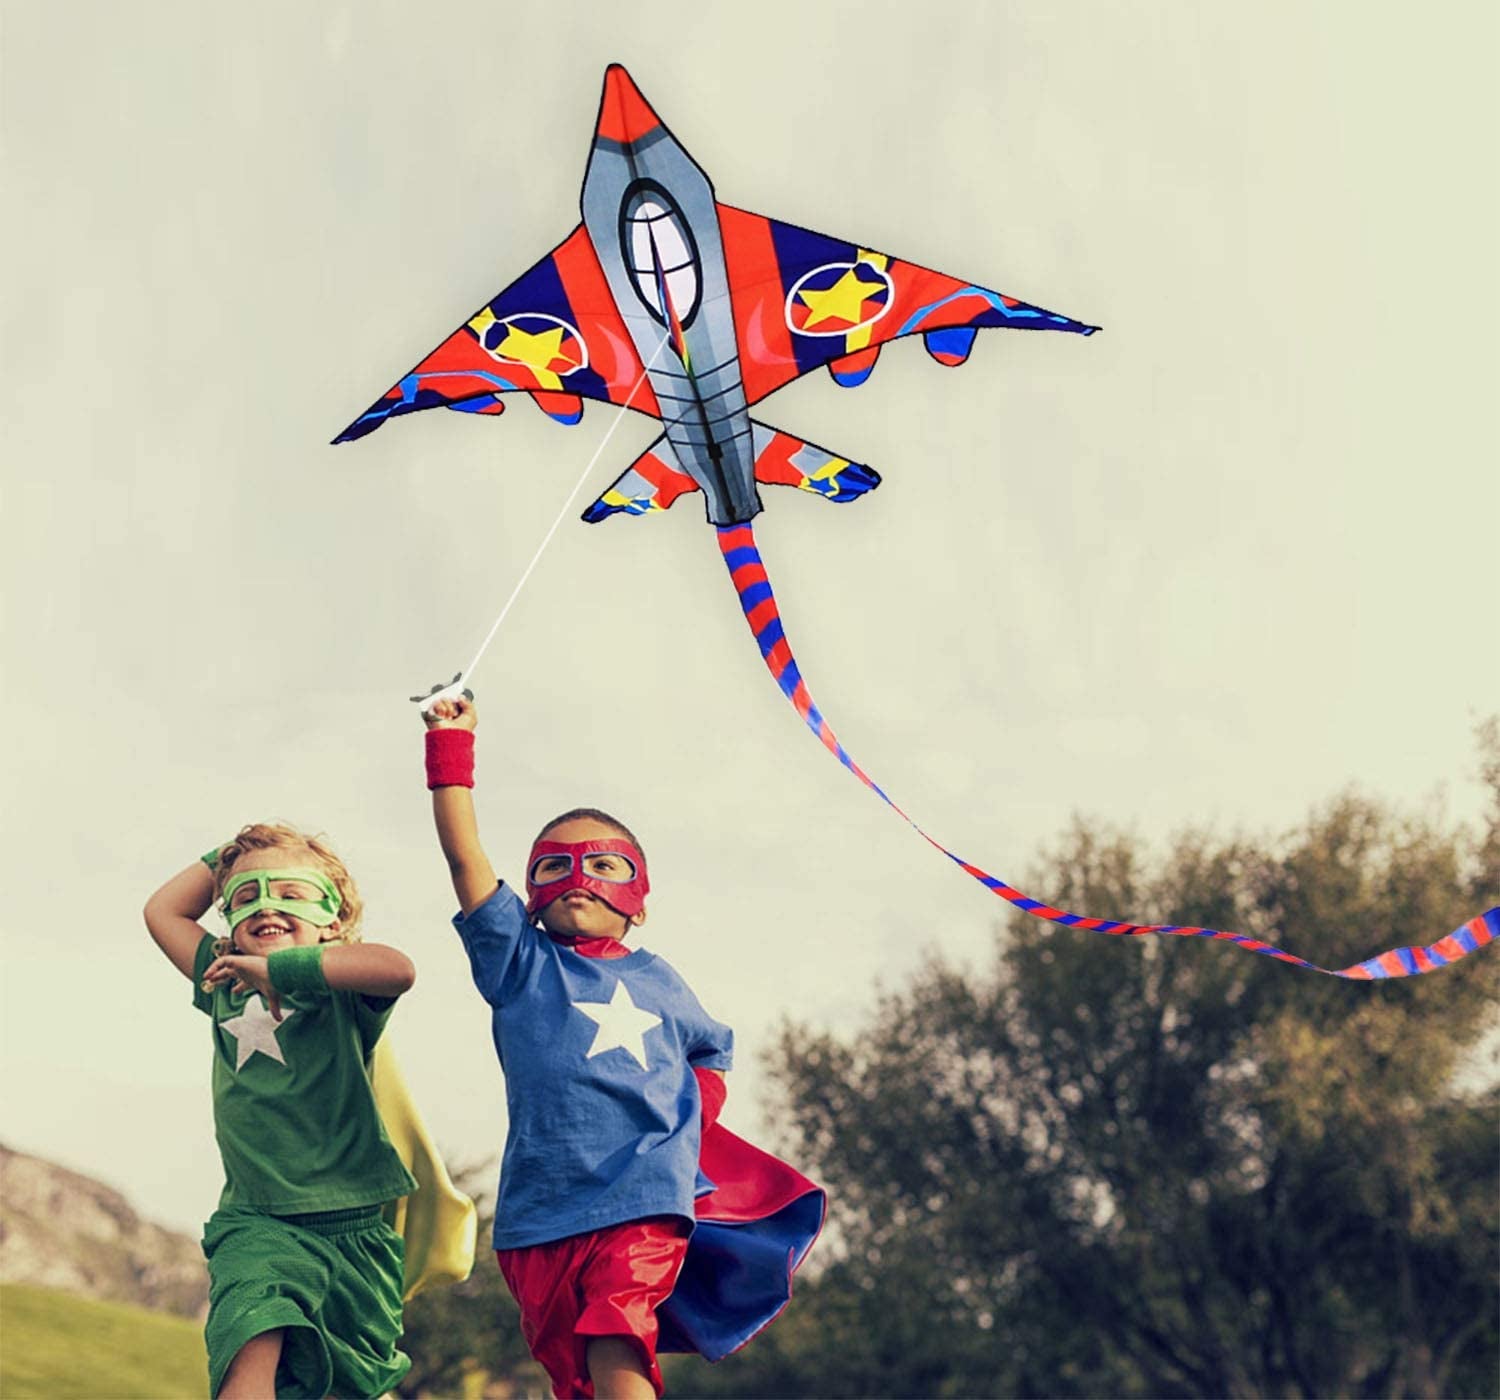 58" Fighter Plane Kites for Kids Easy to Fly, Kite for Adults, with Kite Reel and 200Ft String, Beginner Kite for Beach Trip